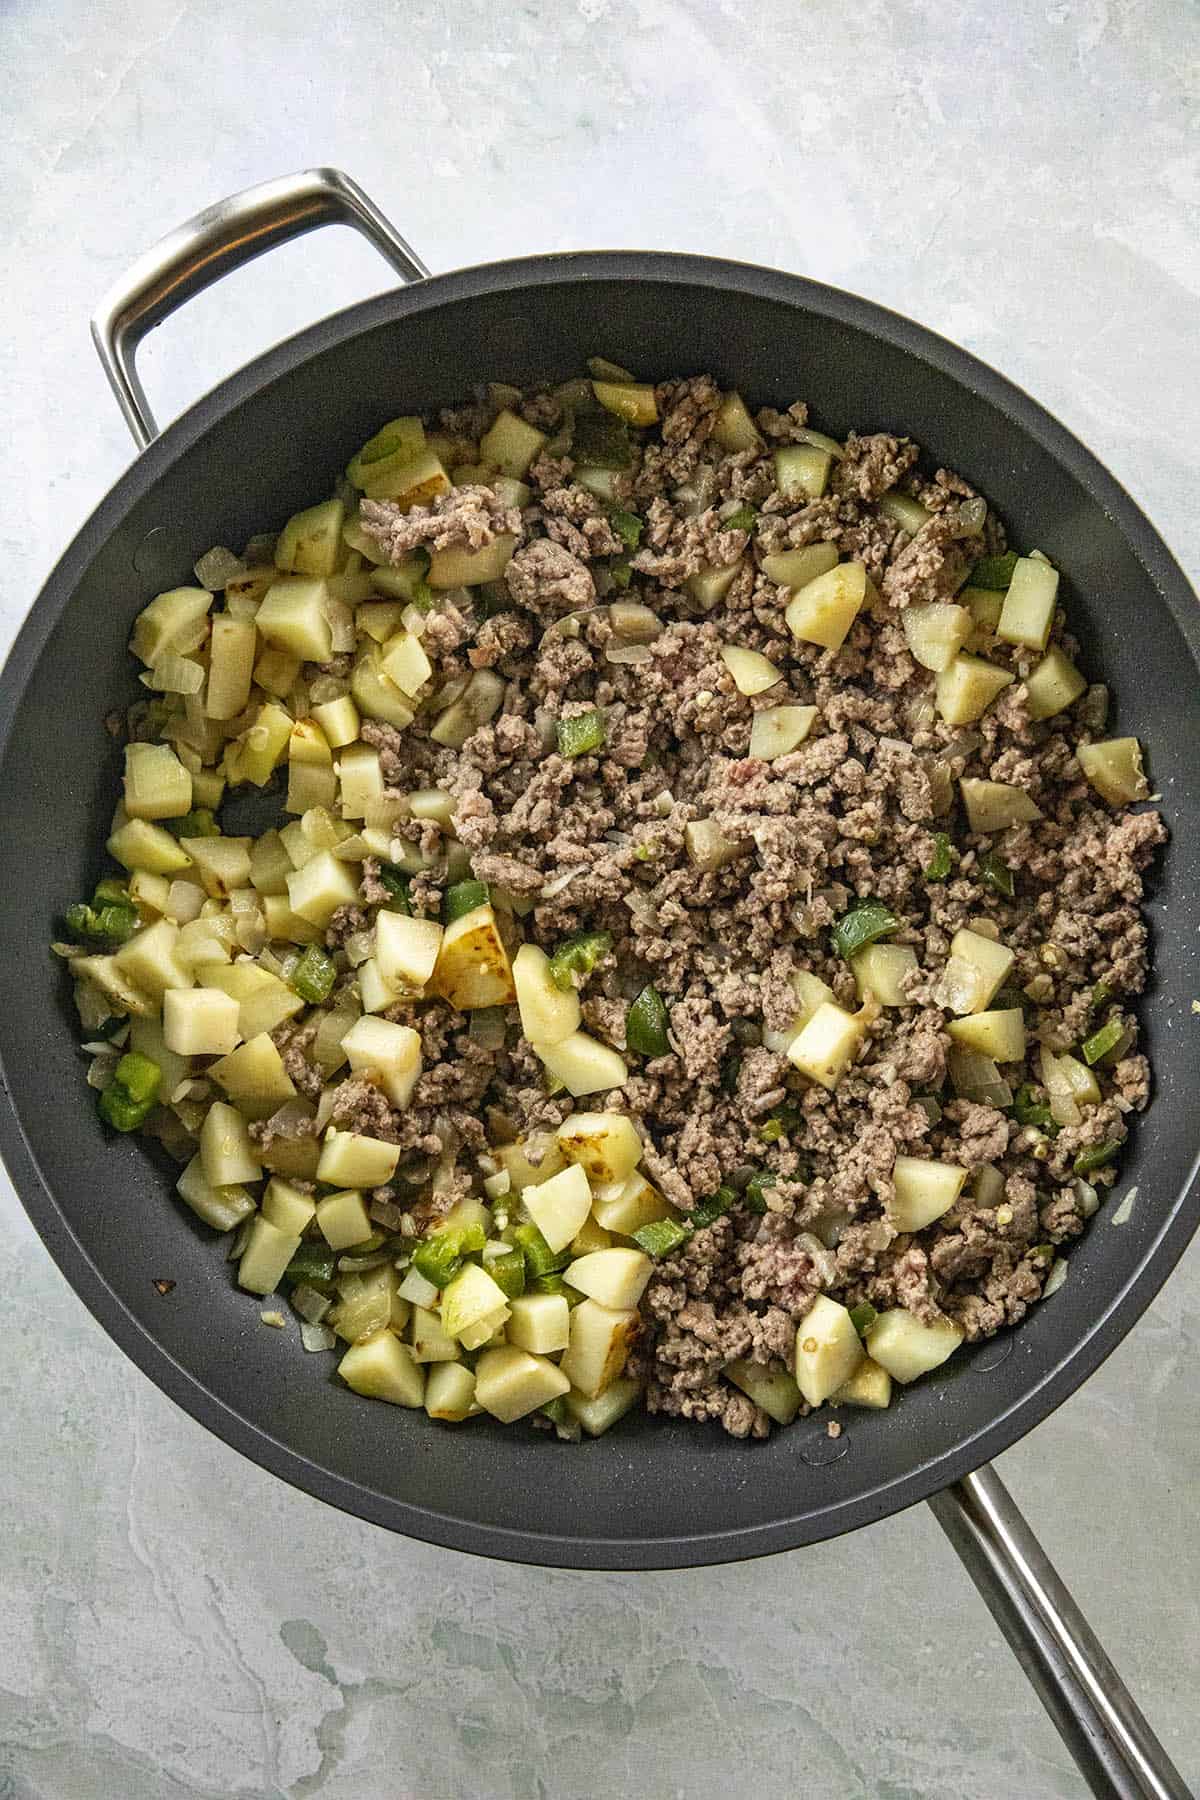 Cooking ground beef, peppers and potatoes to make Mexican Picadillo